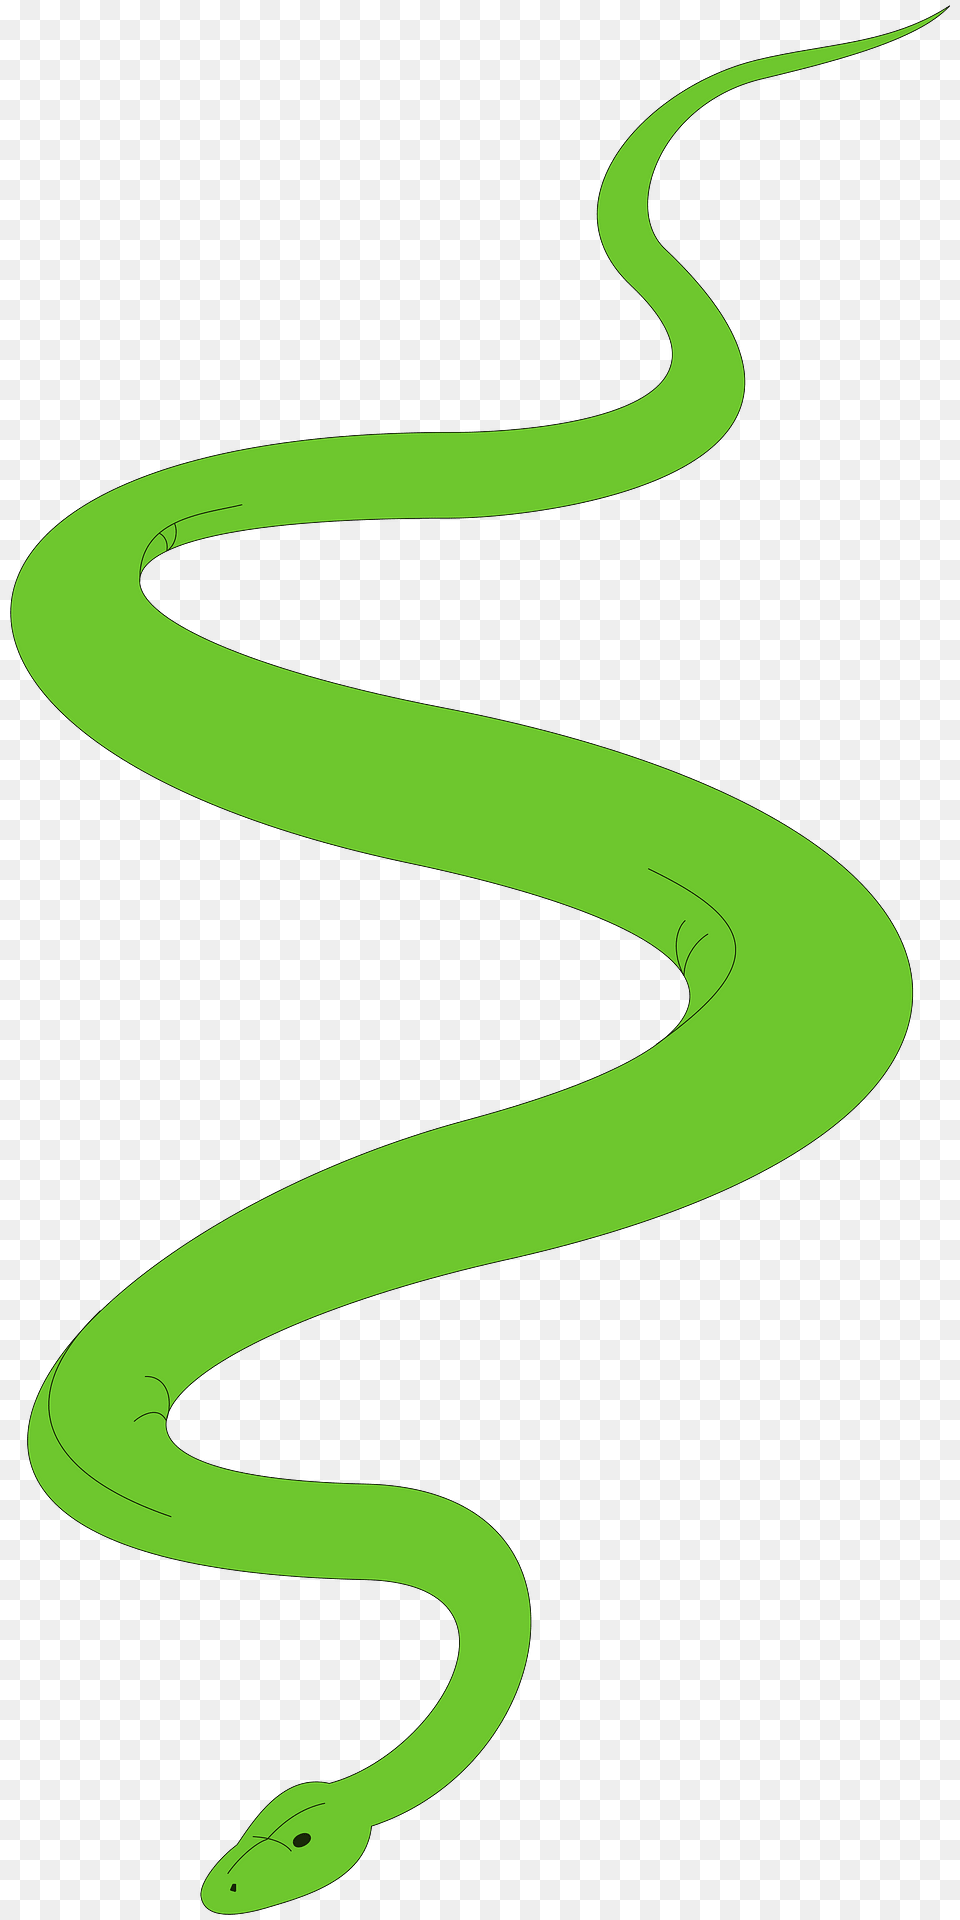 Snake Clipart, Animal, Reptile, Green Snake, Outdoors Png